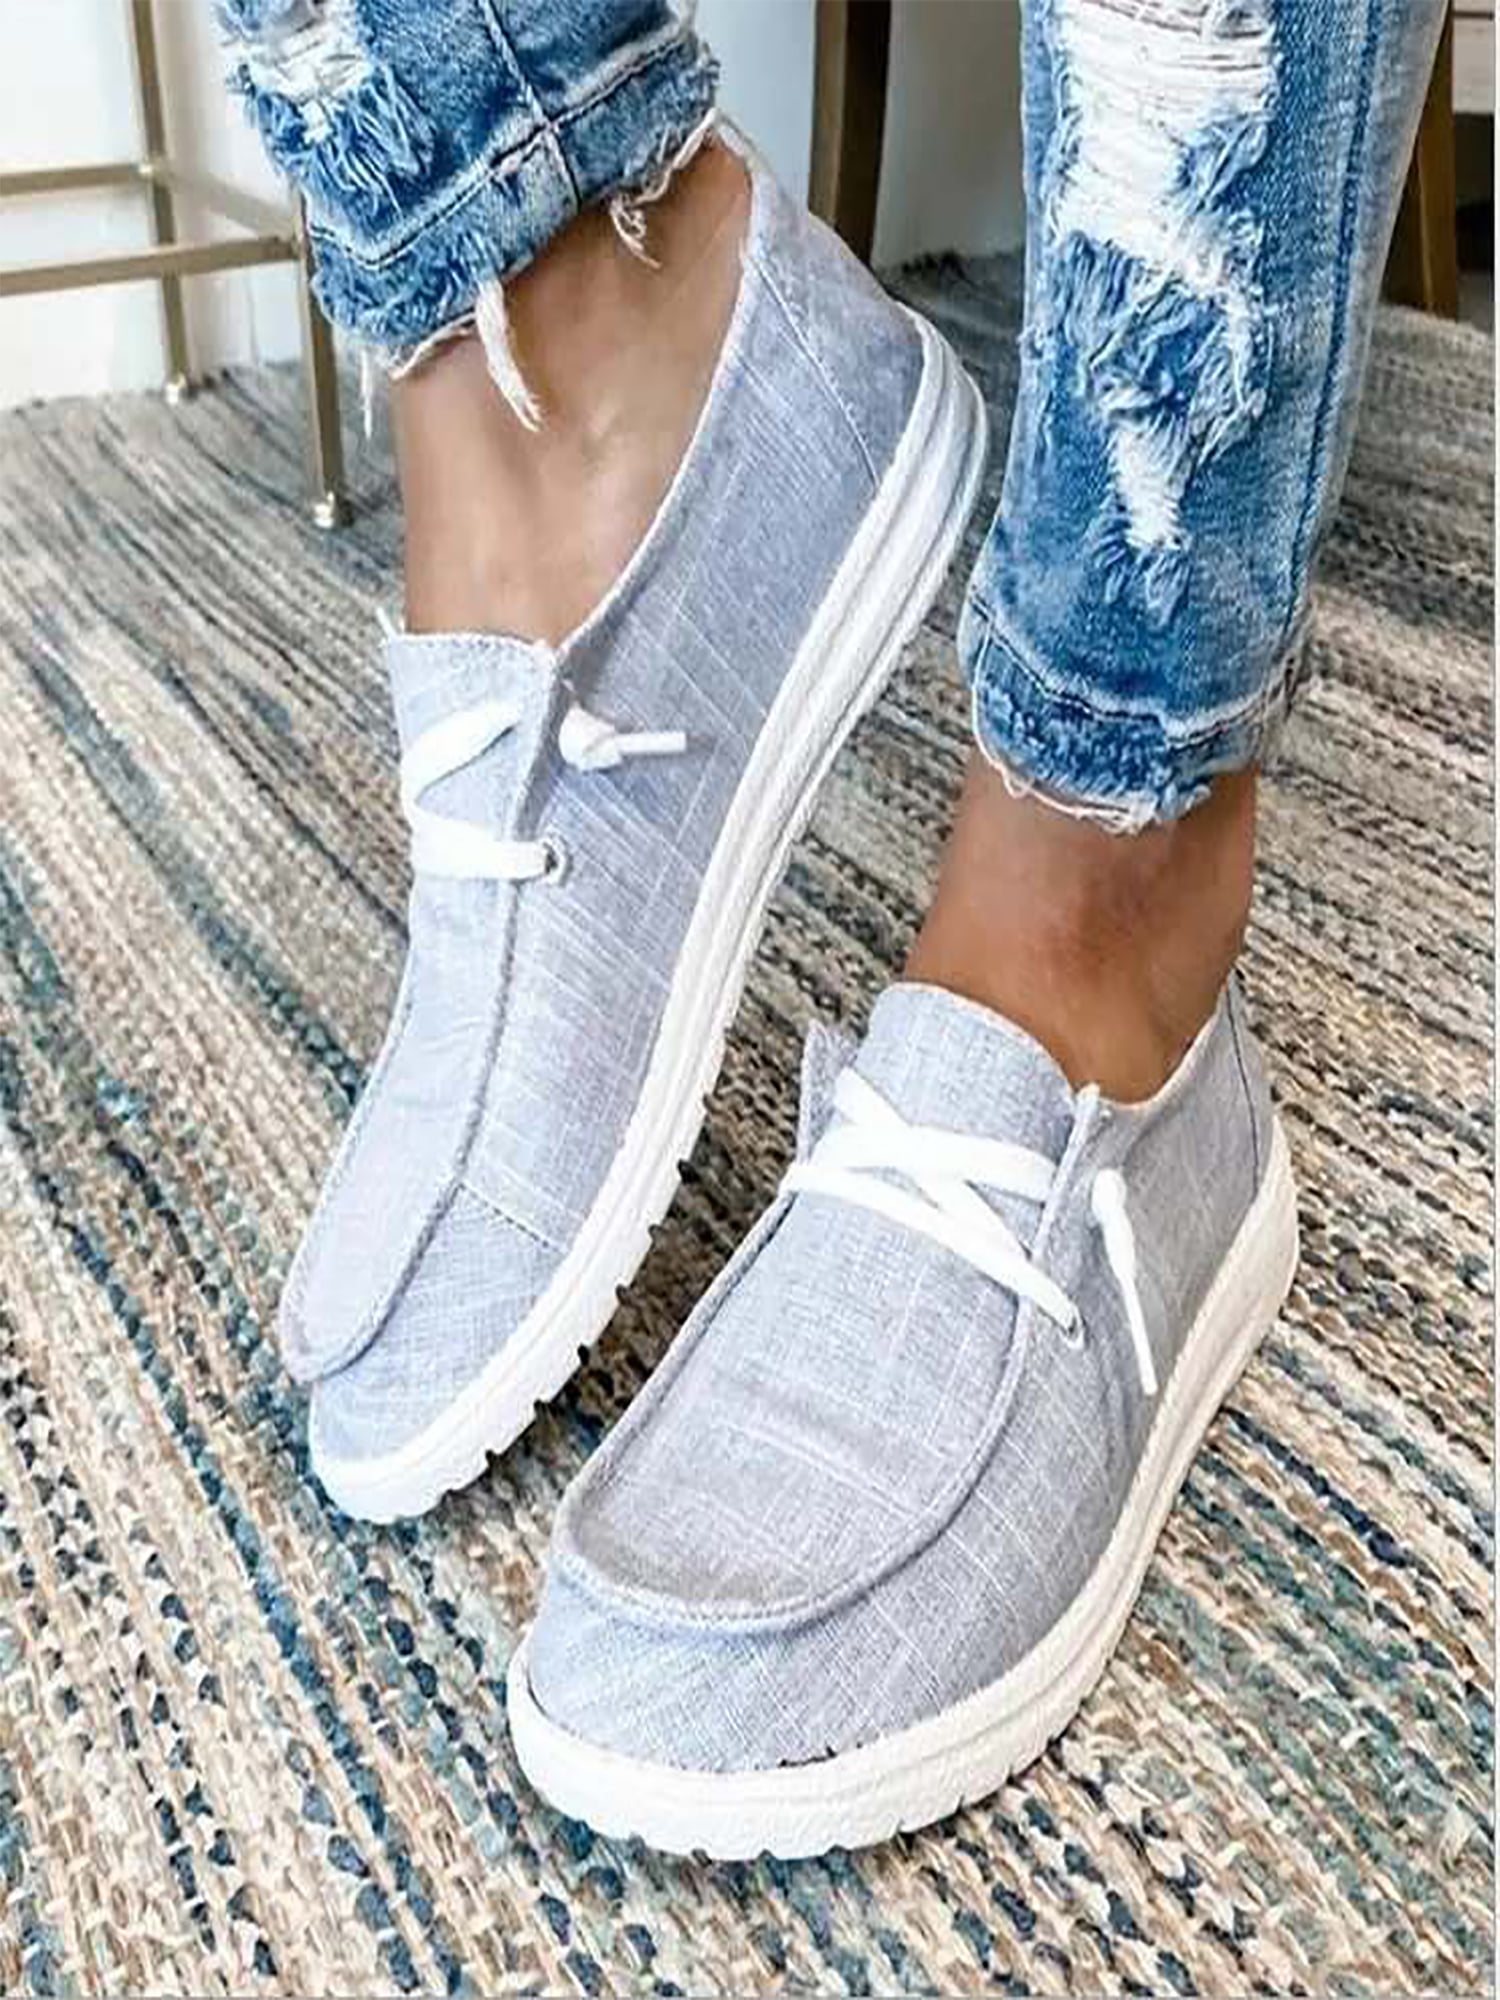 New Womens Lace Up Canvas Shoes Casual Comfy Slip-On Sneakers Size 5-11 